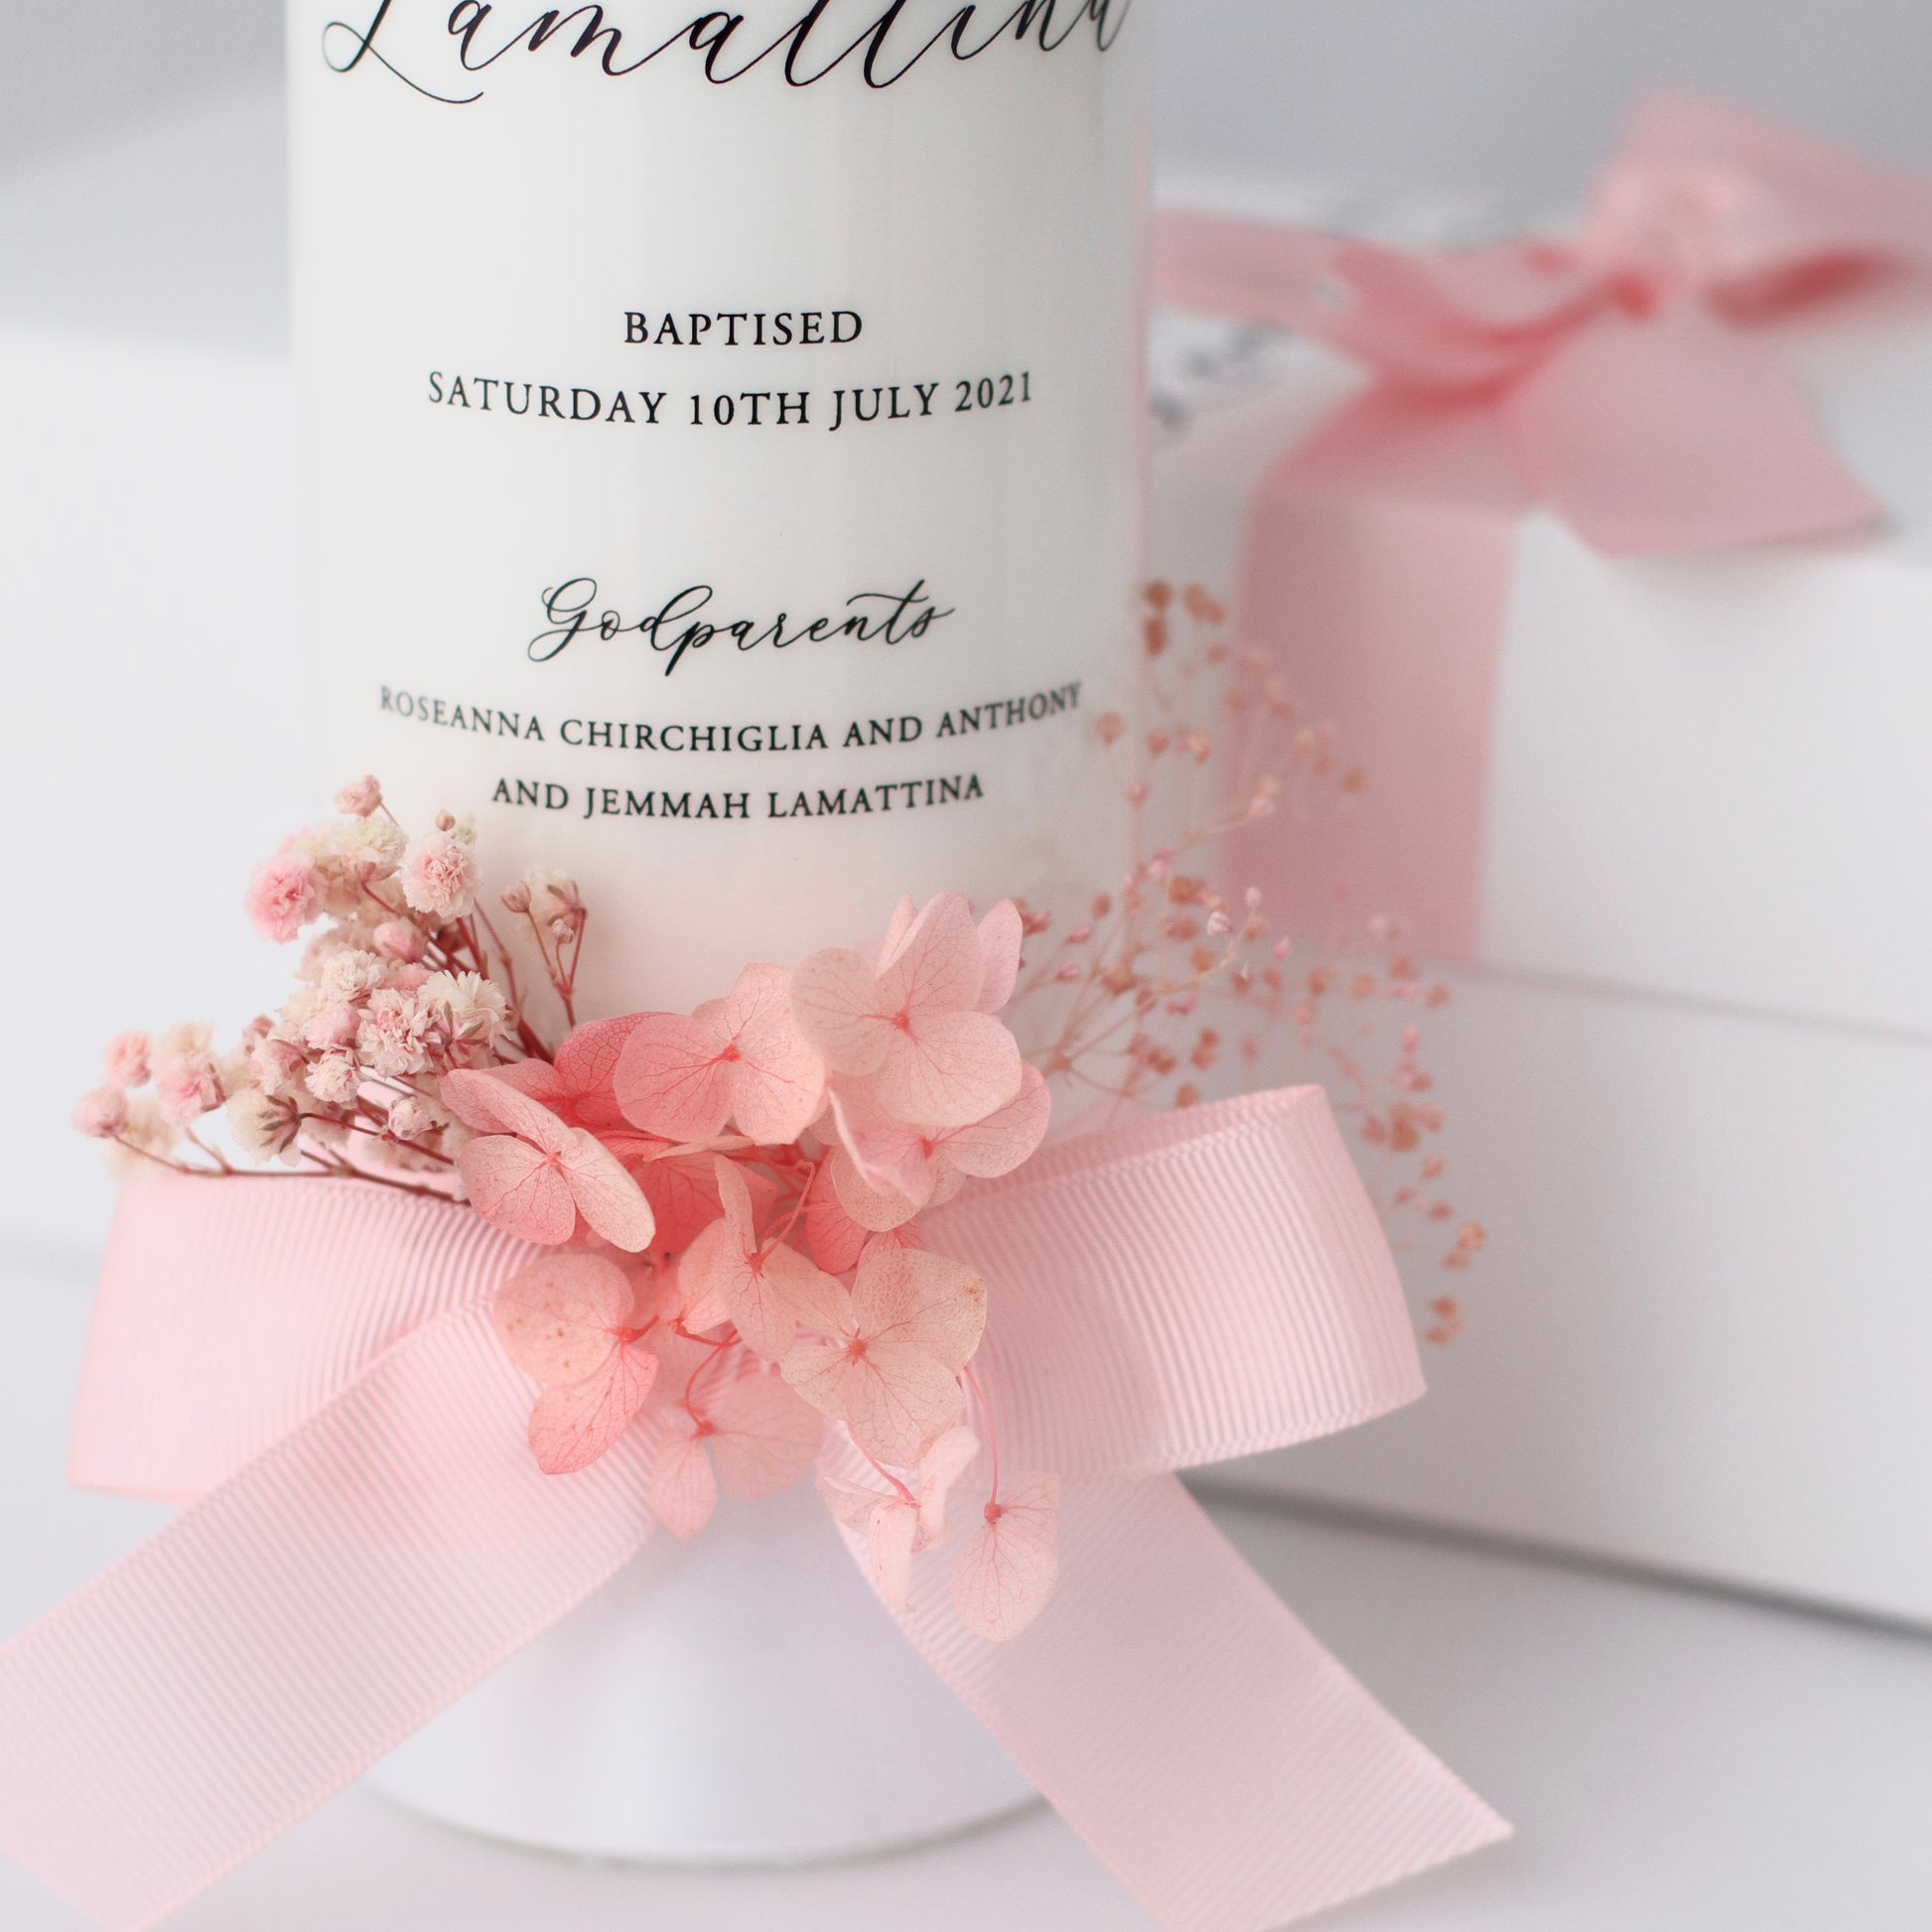 Preserved Floral & Ribbon Baptism Candle - candle comes with an optional personalised display box, made to match the candle